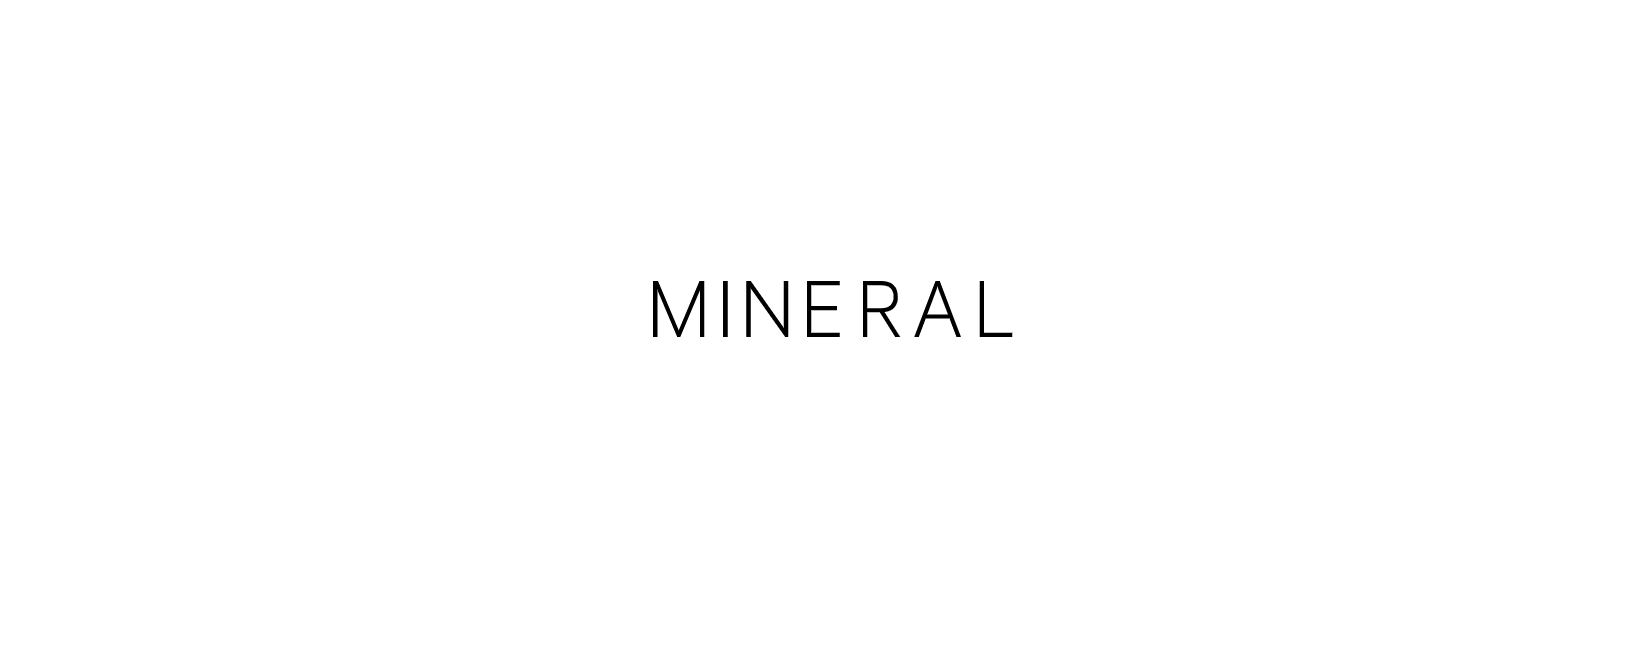 MINERAL Discount Code 2022